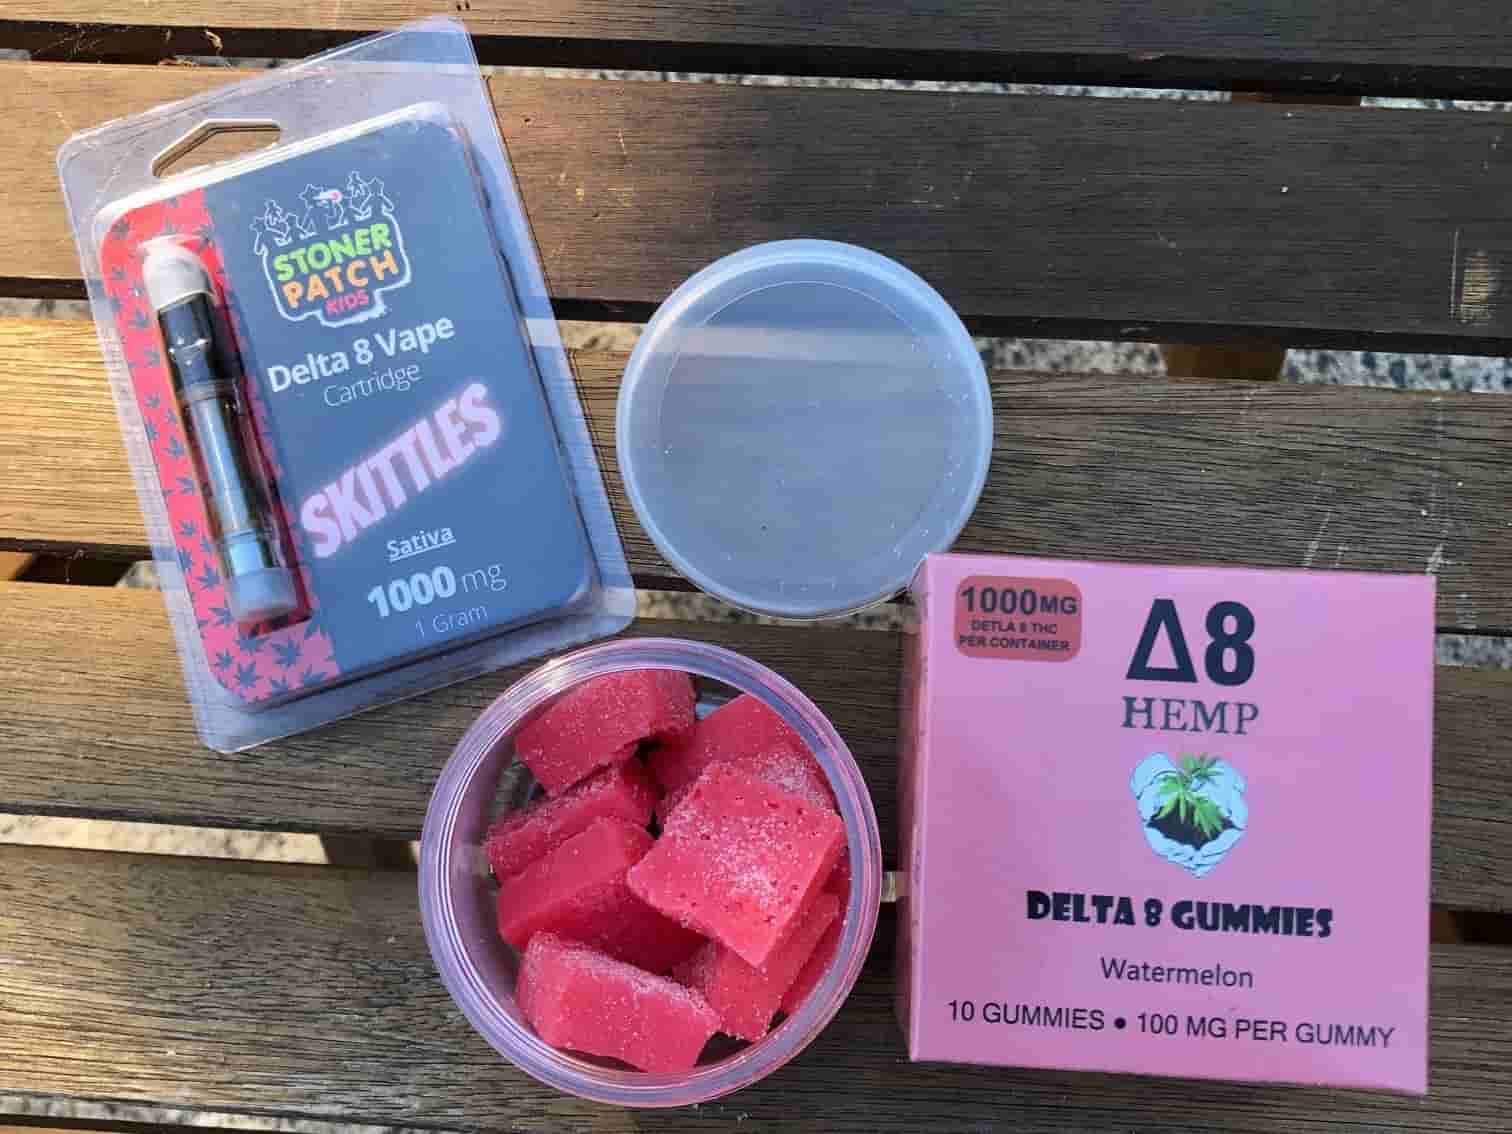 HOW LONG WILL DELTA-8 STAY IN YOUR SYSTEM - Gummies|Thc|Products|Hemp|Product|Brand|Effects|Delta|Gummy|Cbd|Origin|Quality|Dosage|Delta-8|Dose|Usasource|Flavors|Brands|Ingredients|Range|Customers|Edibles|Cartridges|Reviews|Side|List|Health|Cannabis|Lab|Customer|Options|Benefits|Overviewproducts|Research|Time|Market|Drug|Farms|Party|People|Delta-8 Thc|Delta-8 Products|Delta-9 Thc|Delta-8 Gummies|Delta-8 Thc Products|Delta-8 Brands|Customer Reviews|Brand Overviewproducts|Drug Tests|Free Shipping|Similar Benefits|Vape Cartridges|Hemp Doctor|United States|Third Party Lab|Drug Test|Thc Edibles|Health Canada|Cannabis Plant|Side Effects|Organic Hemp|Diamond Cbd|Reaction Time|Legal Hemp|Psychoactive Effects|Psychoactive Properties|Third Party|Dry Eyes|Delta-8 Market|Tolerance Level